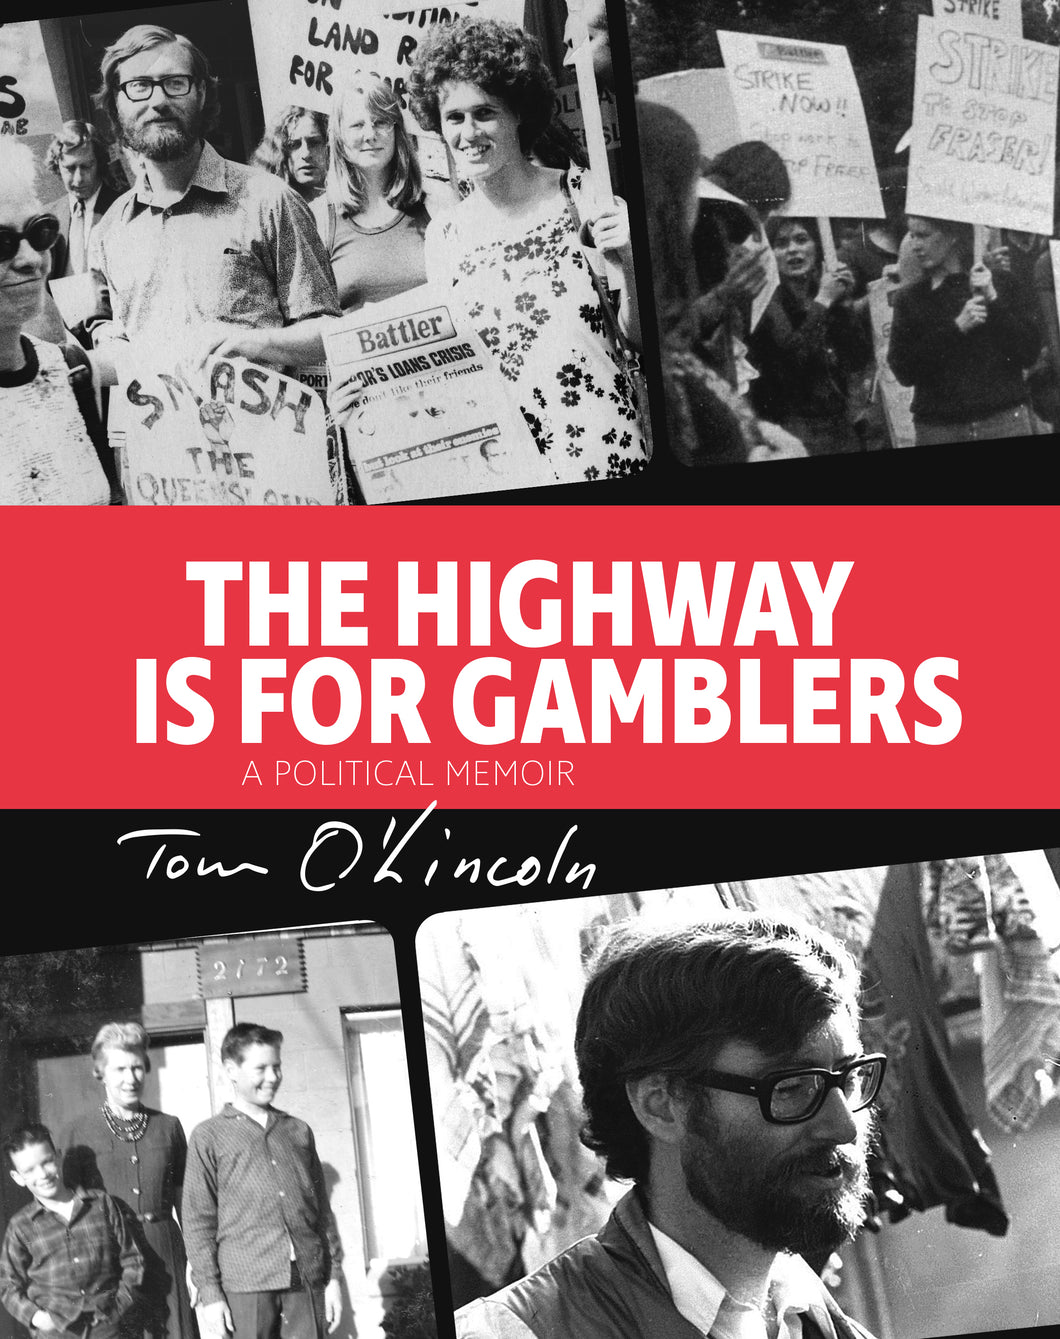 The Highway is for Gamblers: a Political Memoir